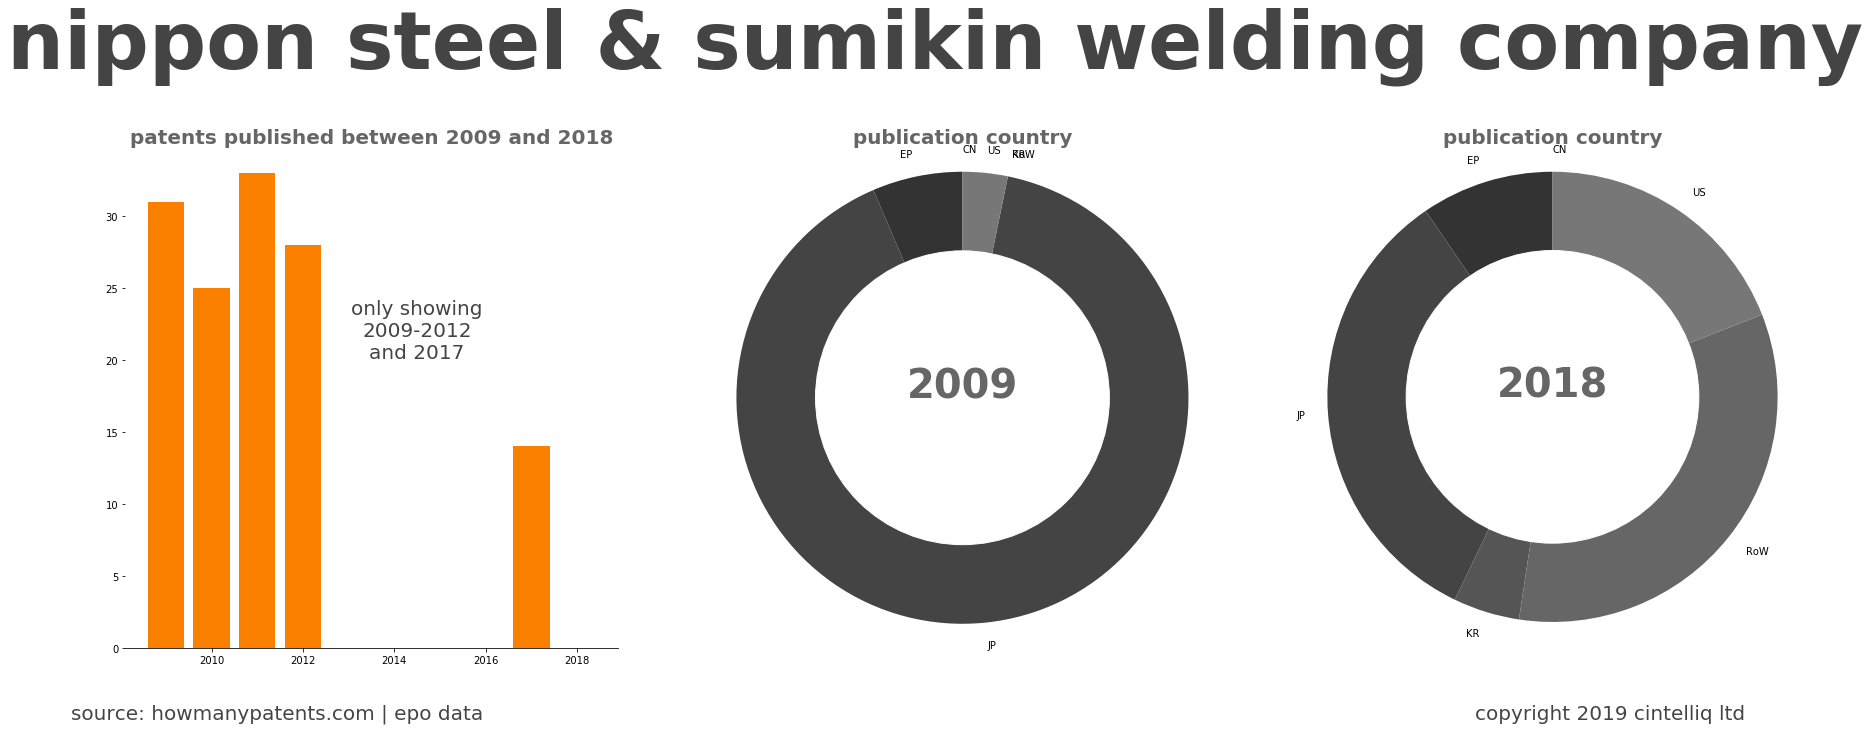 summary of patents for Nippon Steel & Sumikin Welding Company